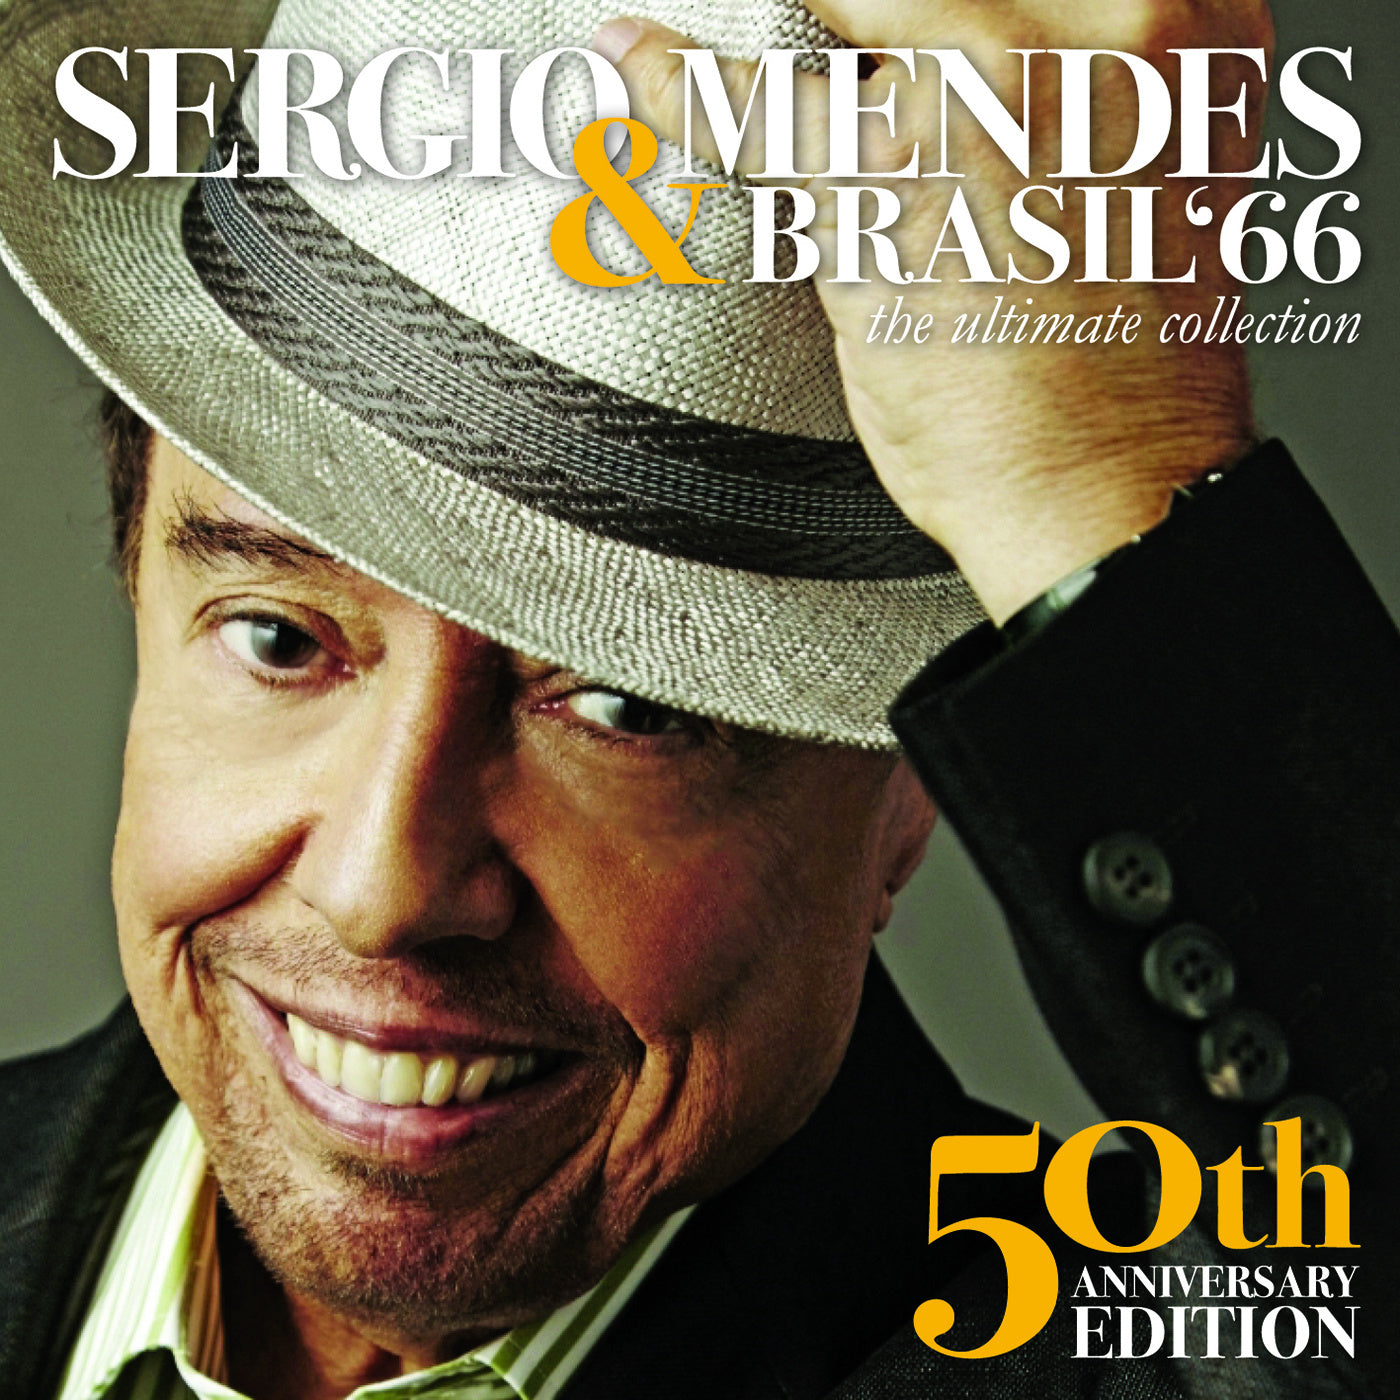 SERGIO MENDES & BRASIL 66 - THE ULTIMATE COLLECTION